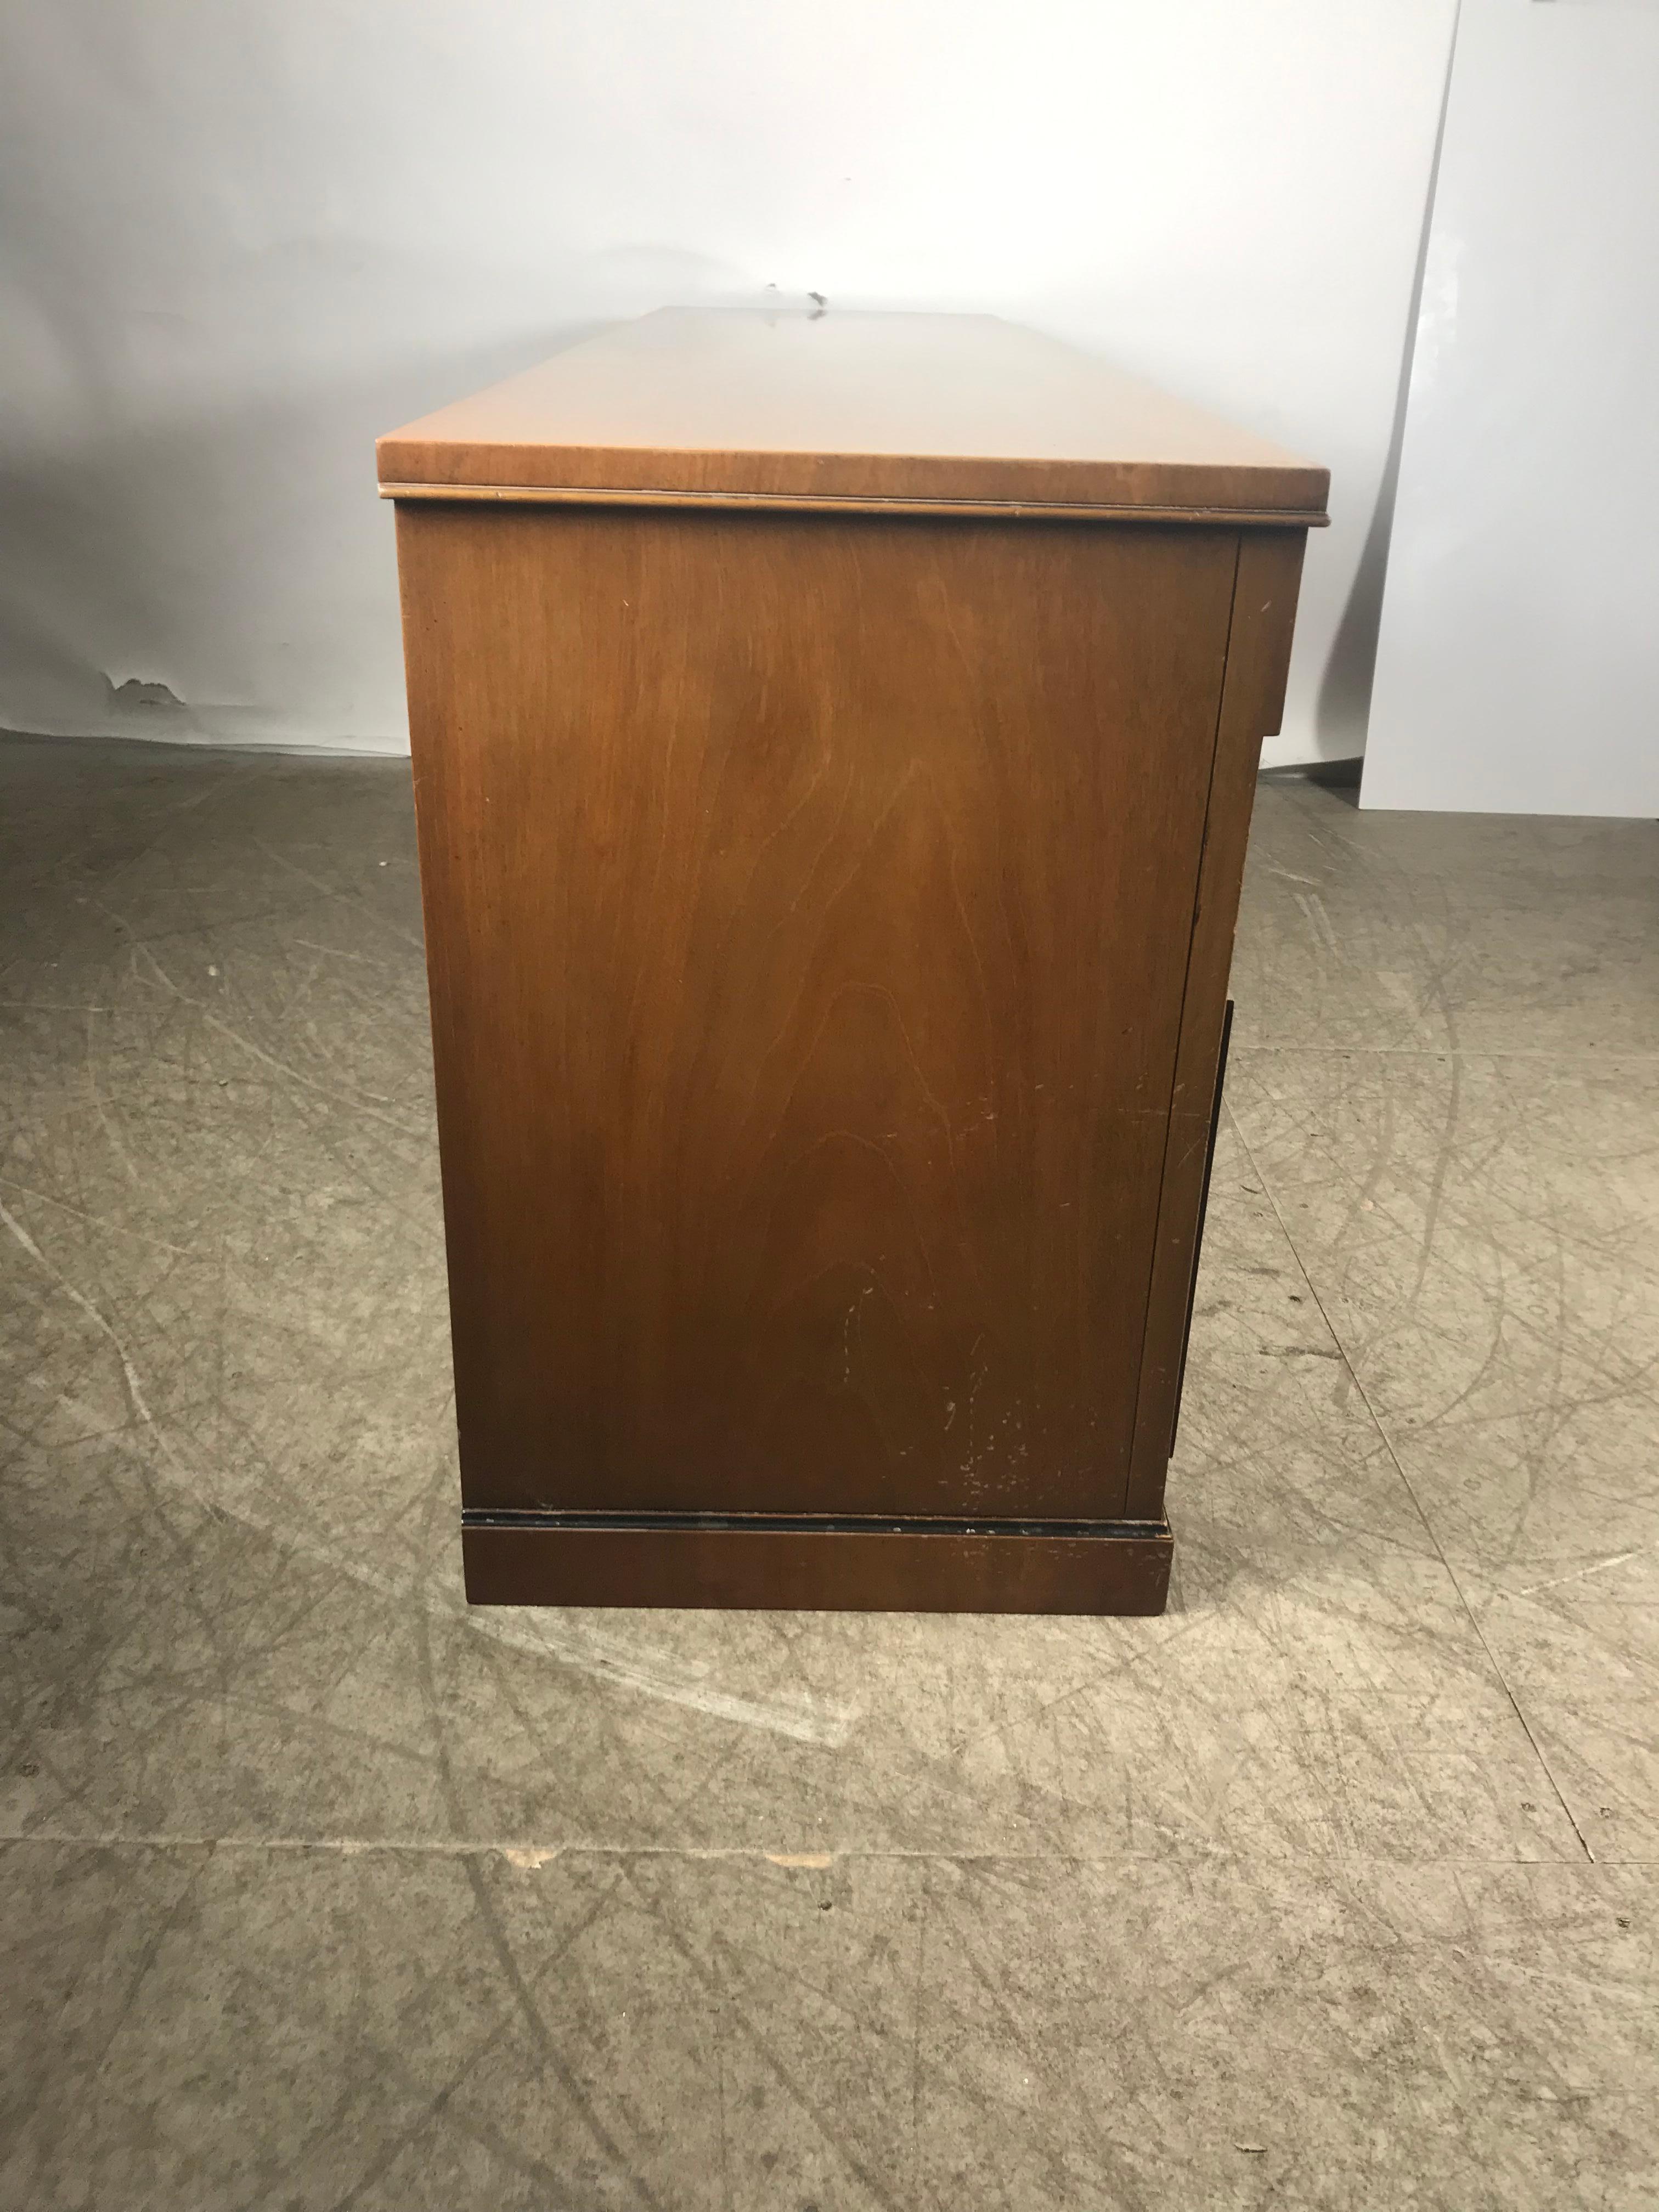 Classic Regency Modernist 9-Drawer Credenza /Sideboard Manufactured by Kittinger In Good Condition For Sale In Buffalo, NY